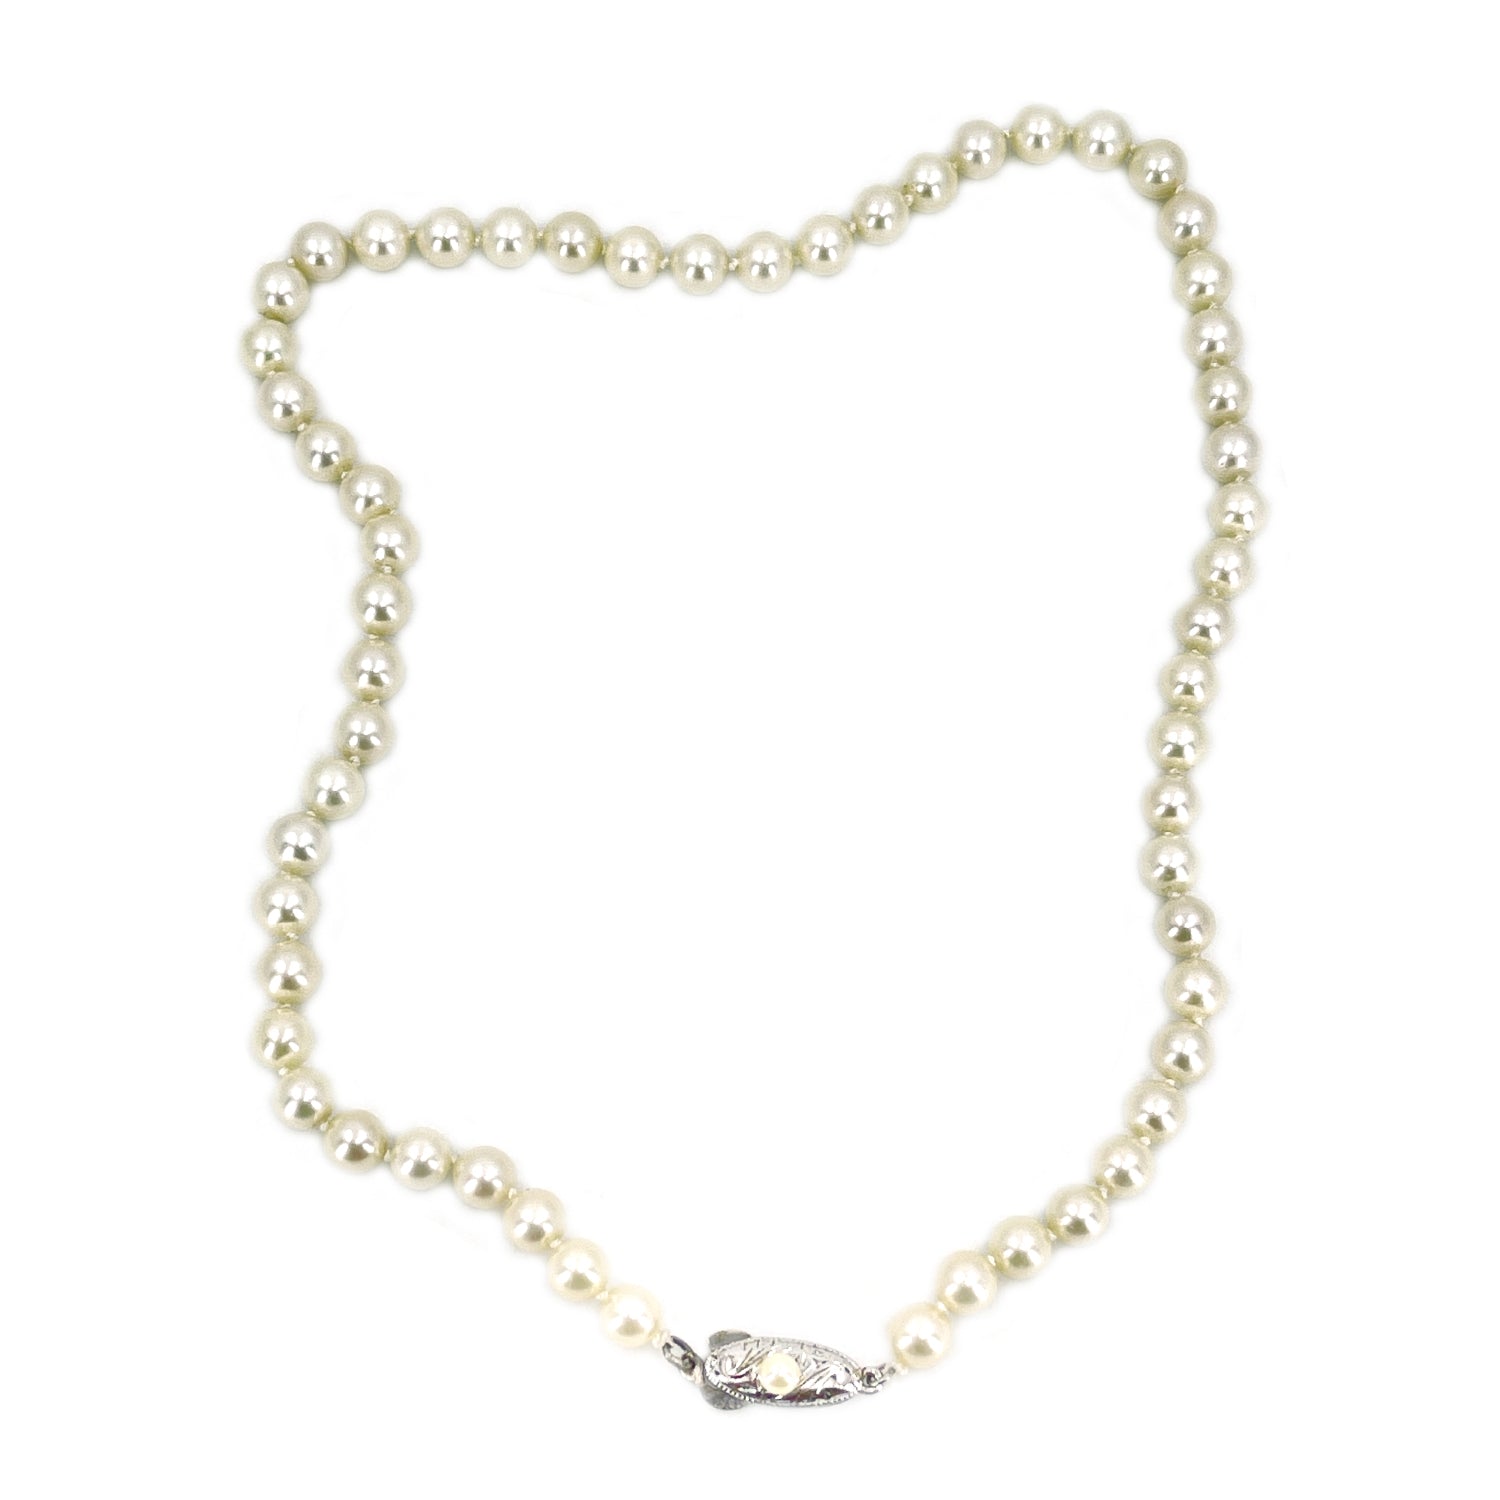 Choker Engraved Japanese Saltwater Cultured Akoya Pearl Vintage Necklace - Sterling Silver 16.25 Inch